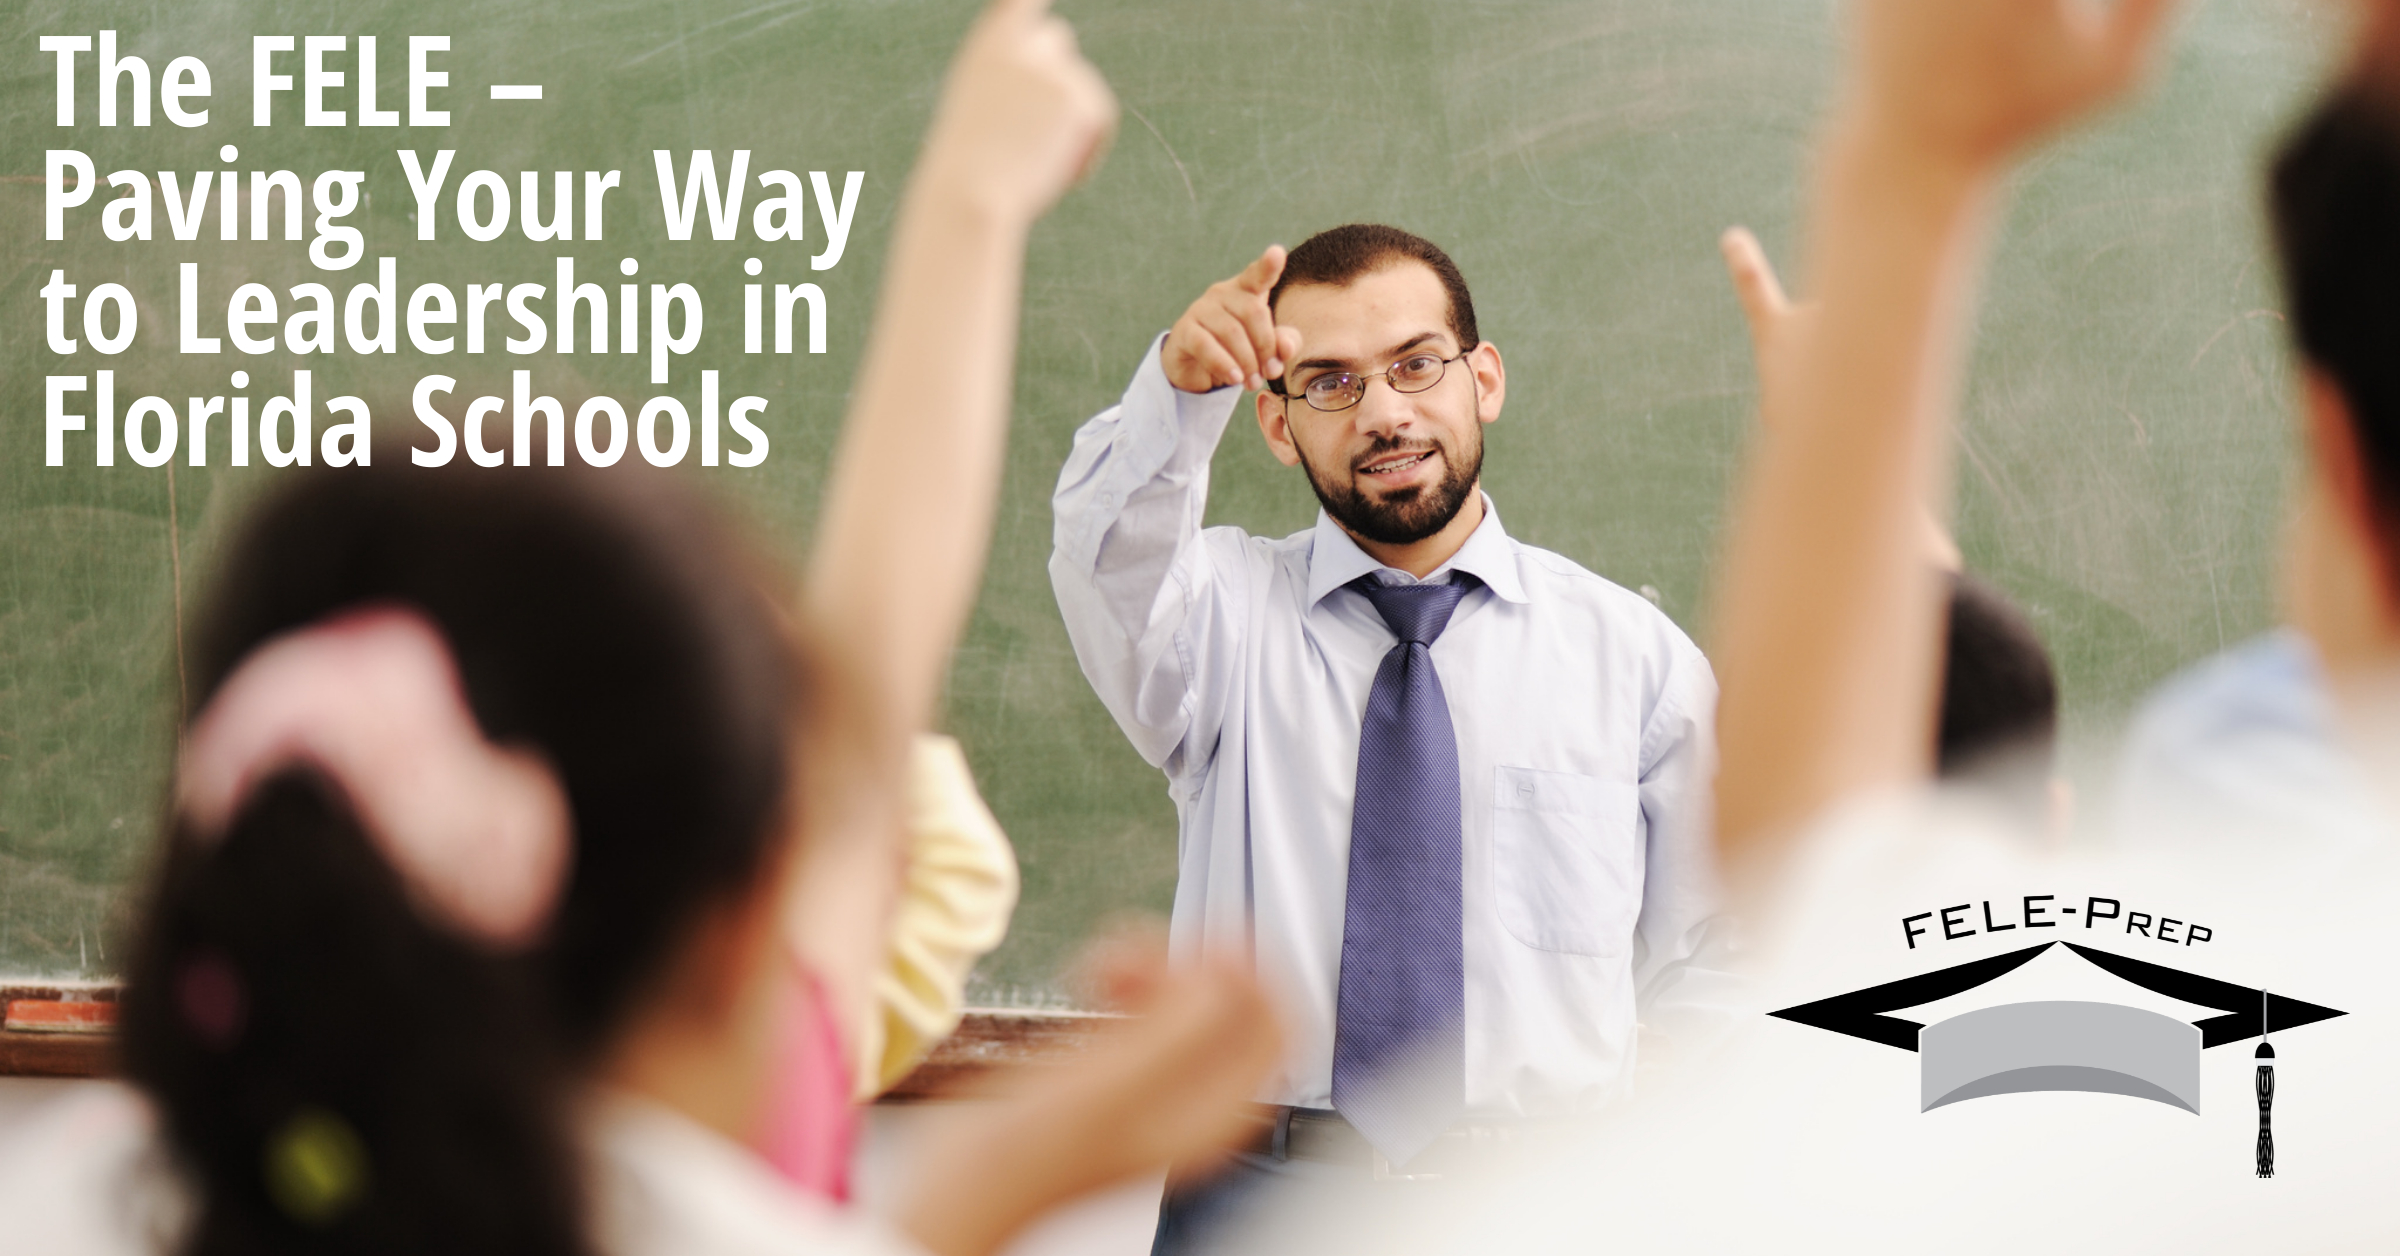 The FELE – Paving Your Way to Leadership in Florida Schools